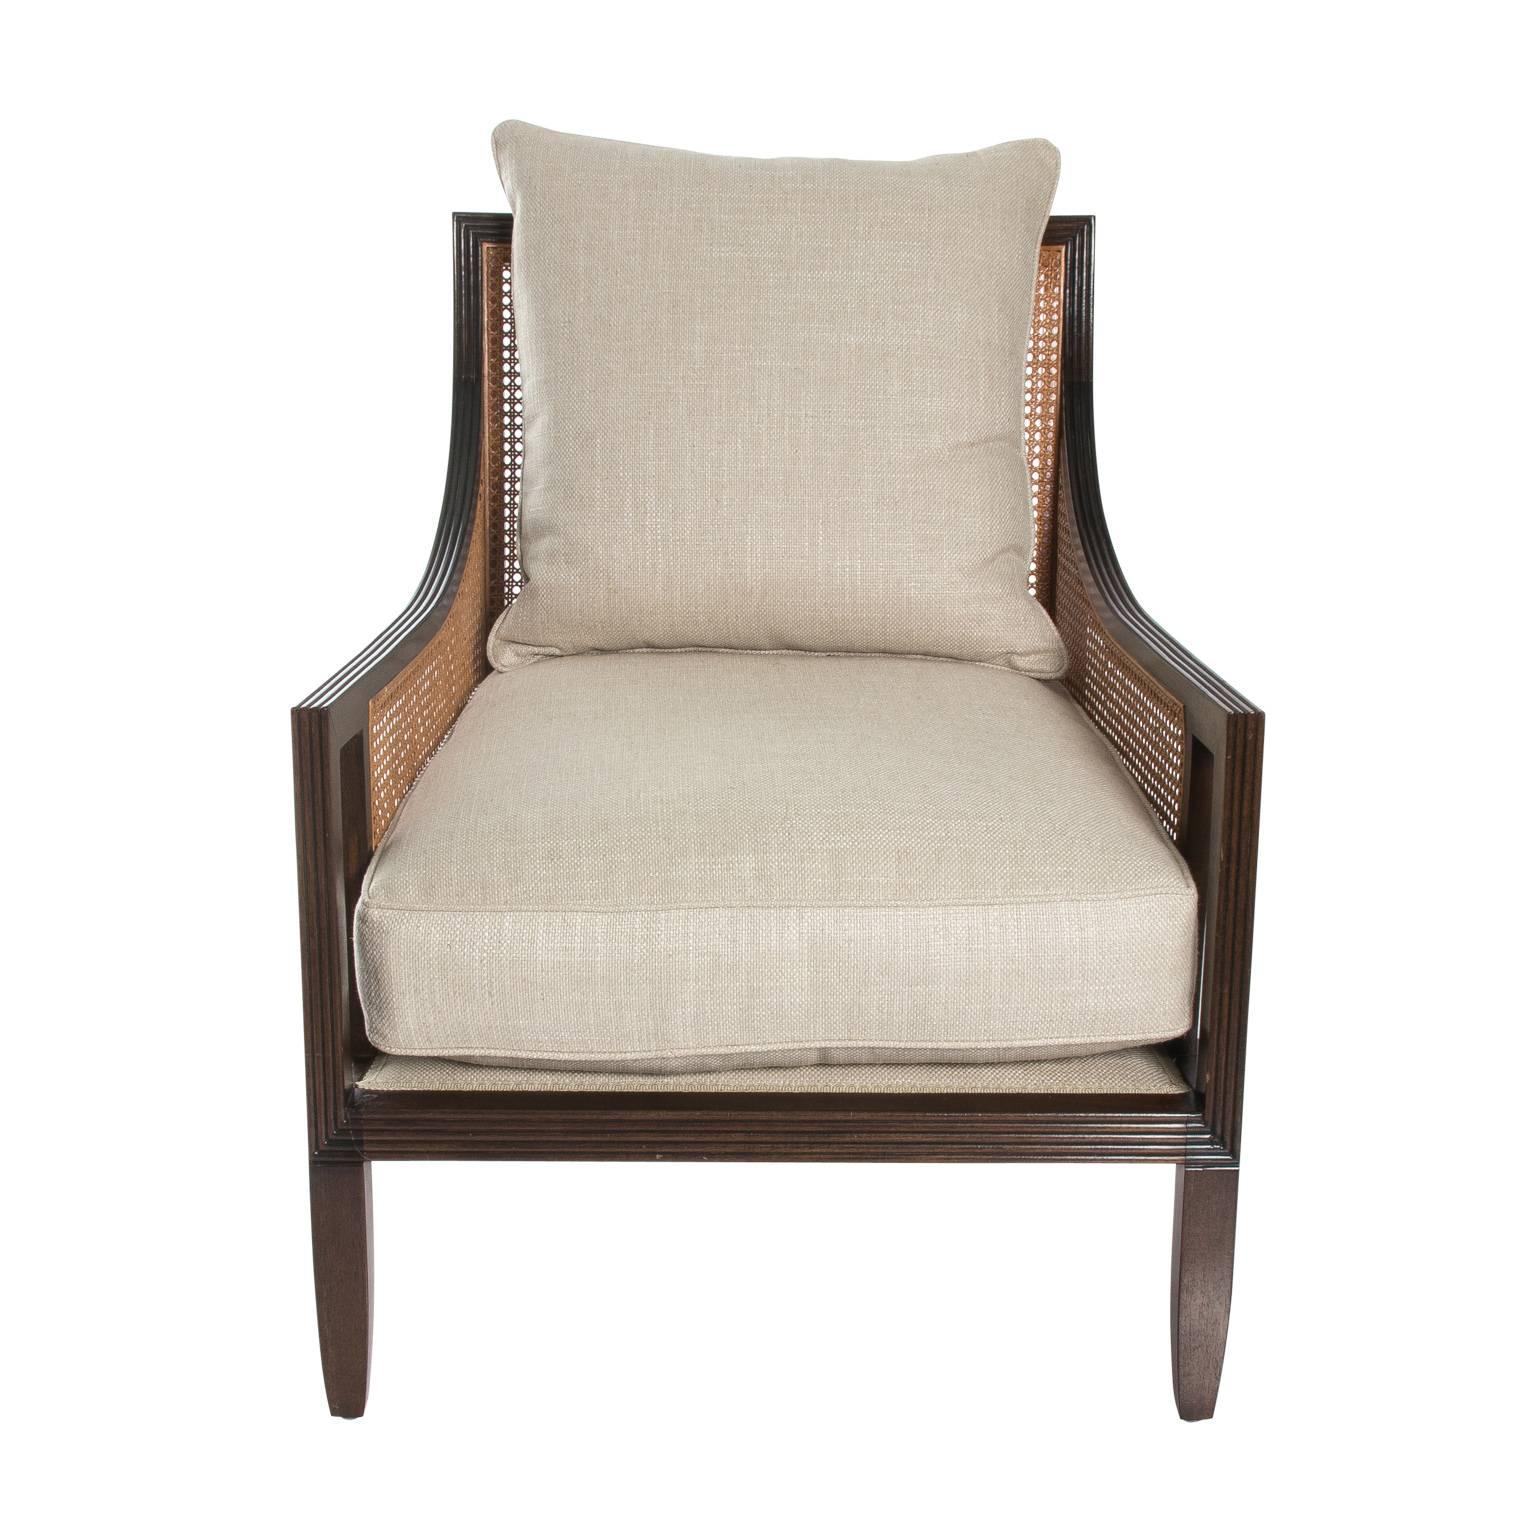 Mid-Century Modern 1970s Mid-Century Caned Lounge Chair